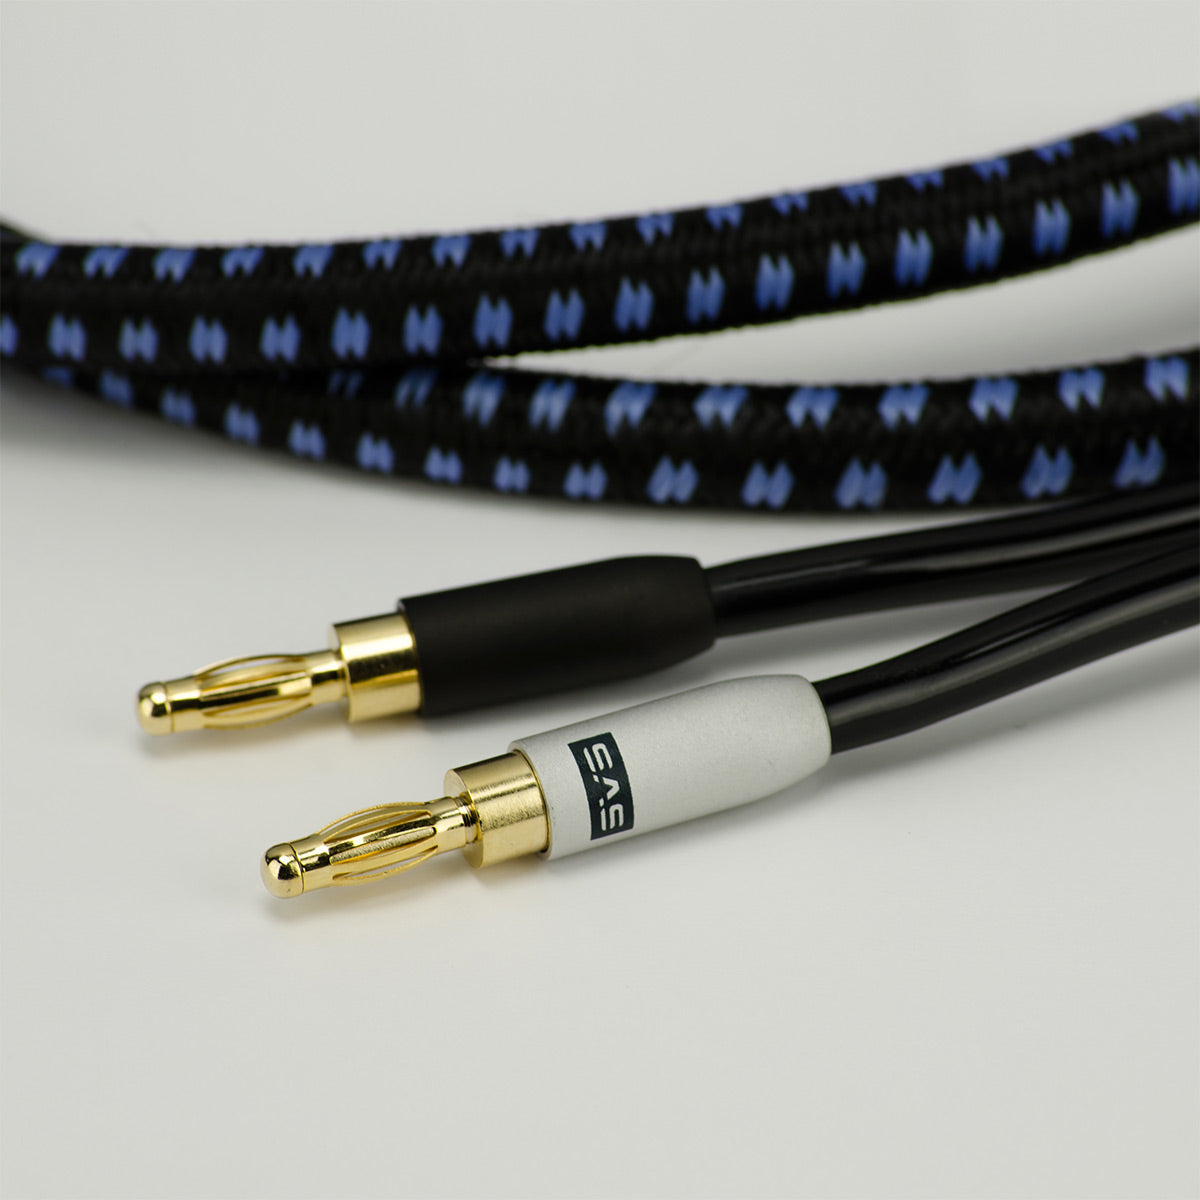 SVS SoundPath Ultra Speaker Cable - 20 ft. (6.1m) - Each